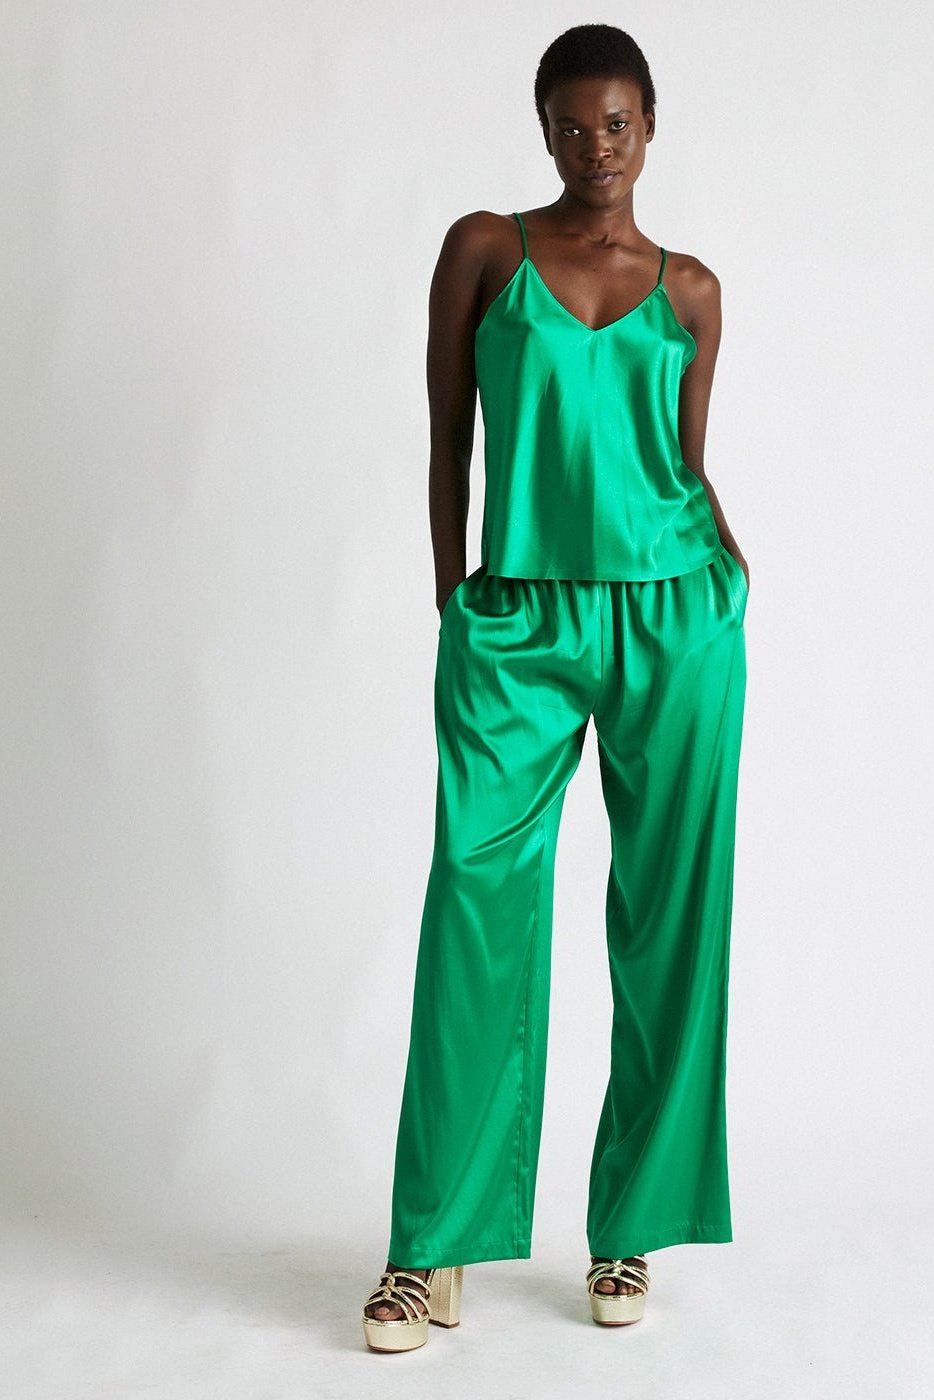 +Beryll Silk Top | Cactus - +Beryll Silk Top | Cactus - +Beryll Worn By Good People